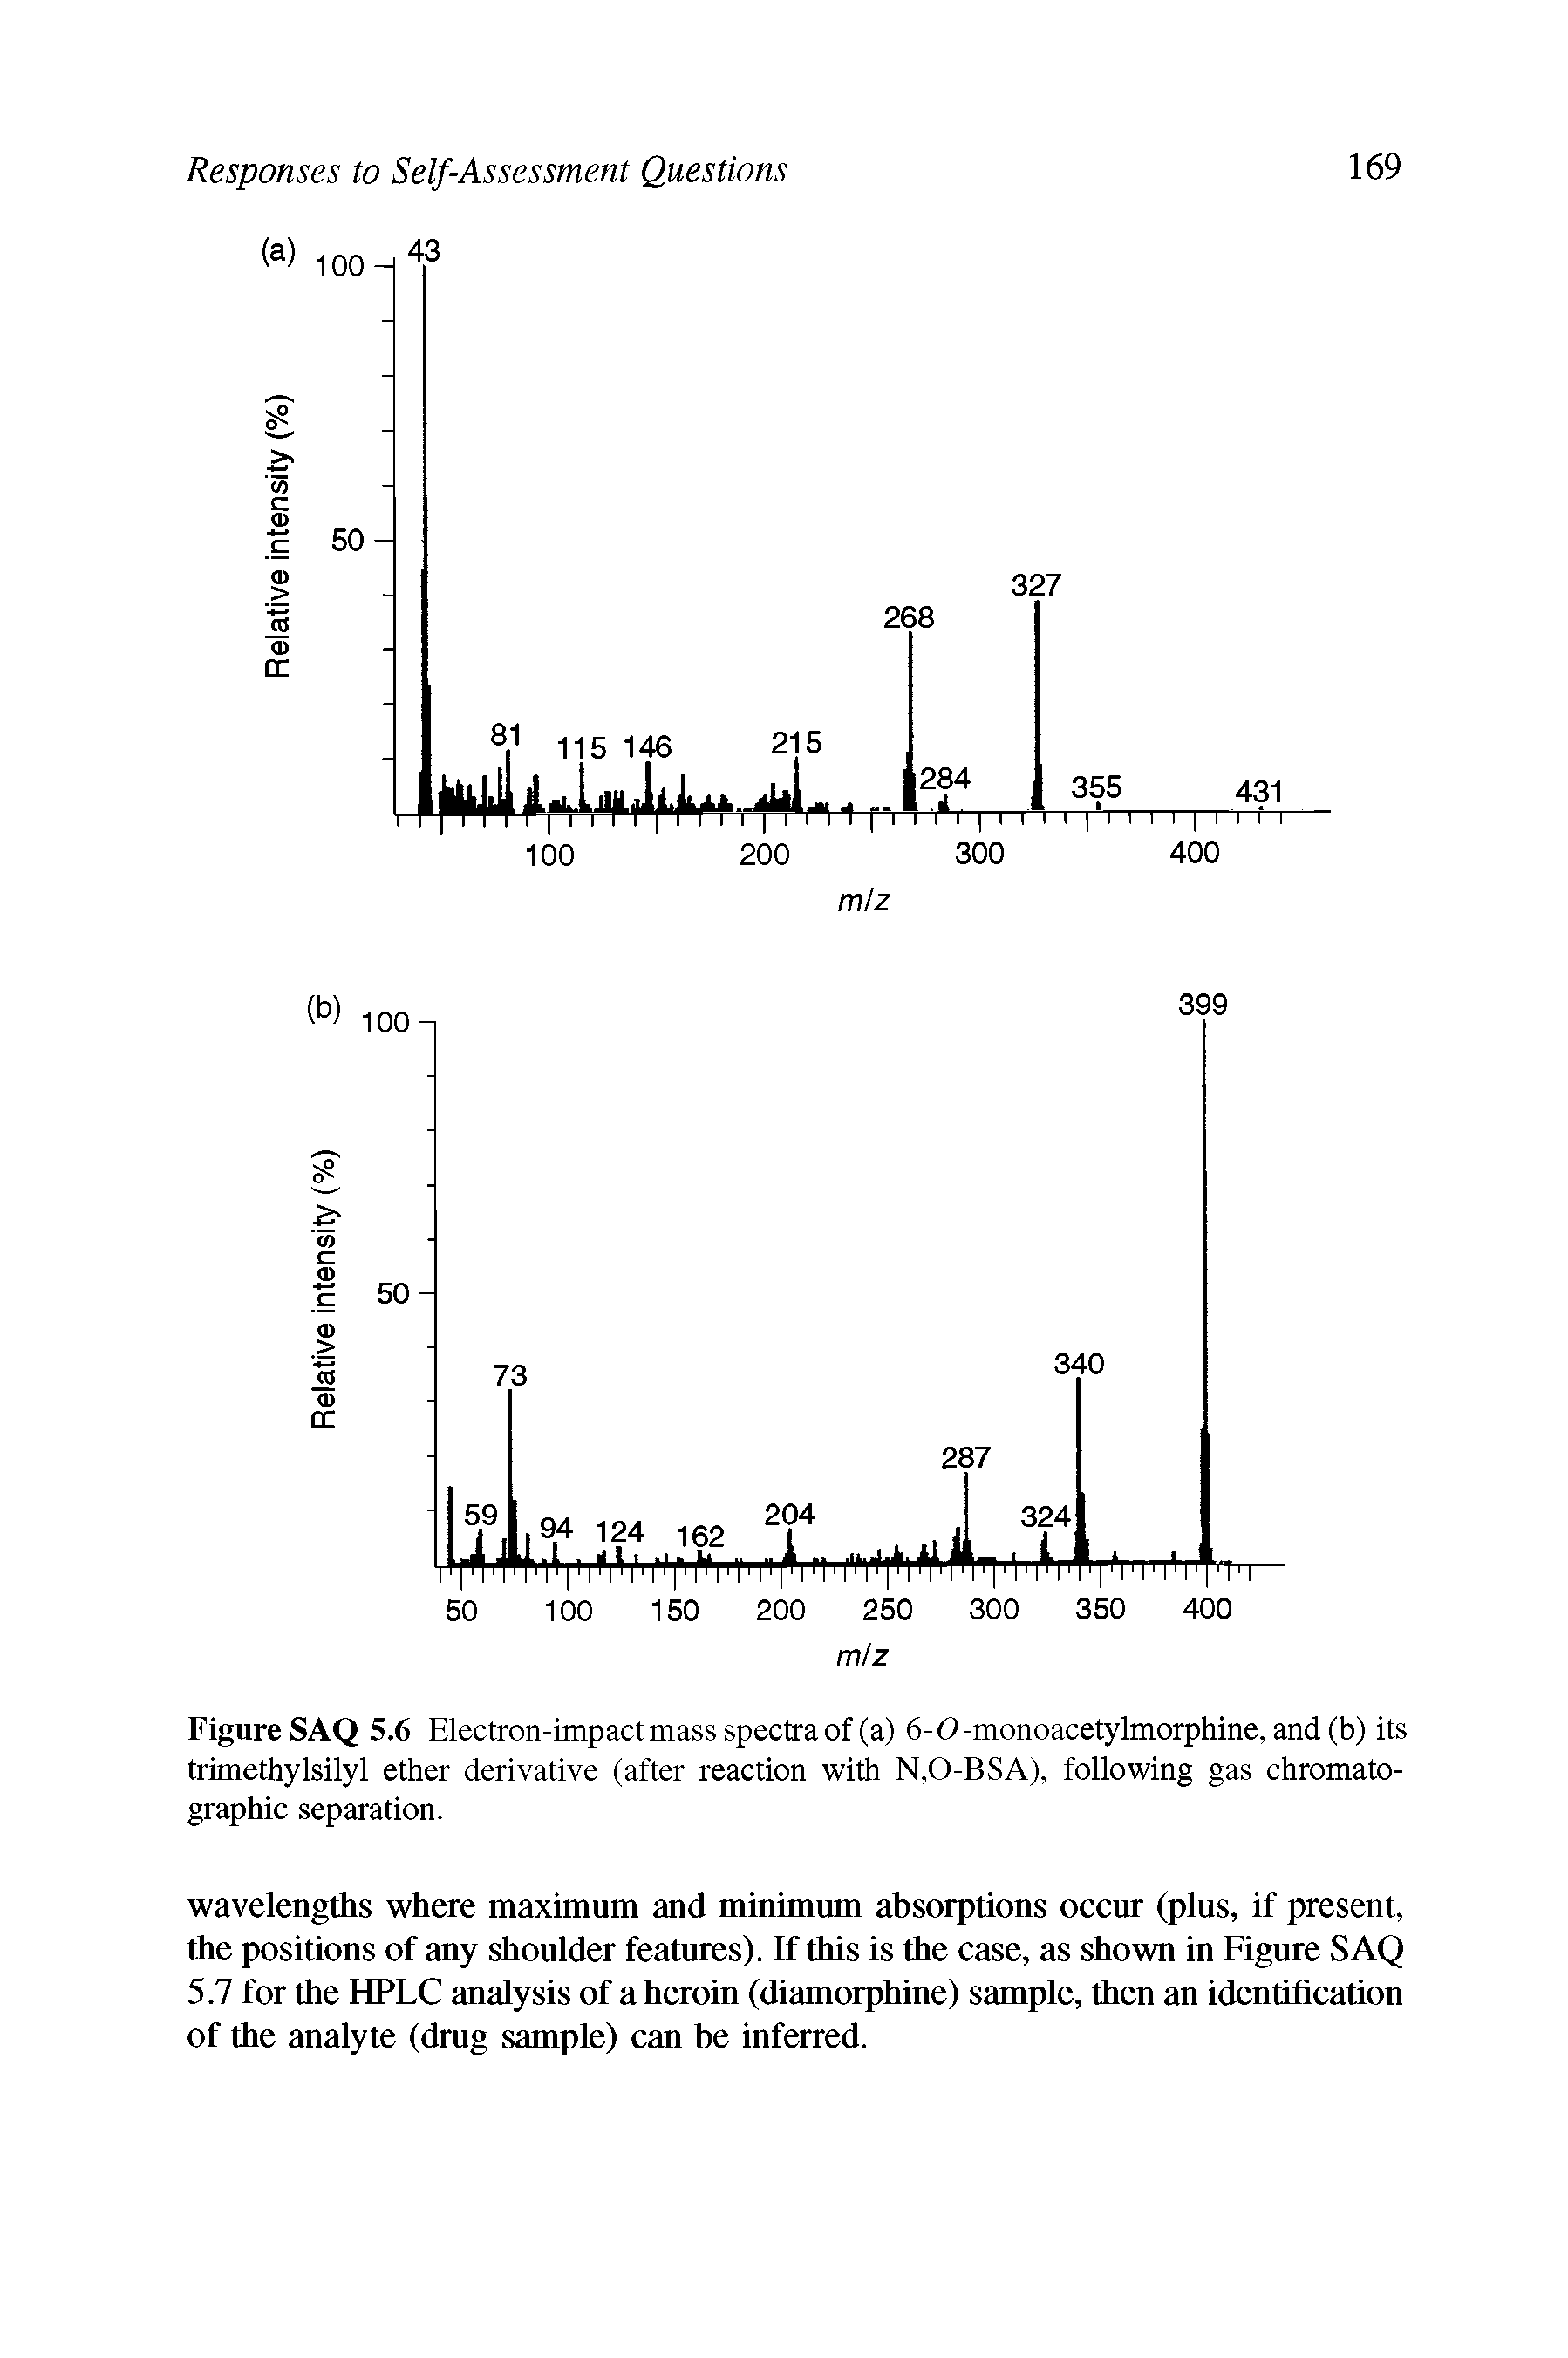 Figure SAQ 5.6 Electron-impact mass spectra of (a) 6-0-monoacetylmorphine, and (b) its trimethylsilyl ether derivative (after reaction with N,0-BSA), following gas chromatographic separation.